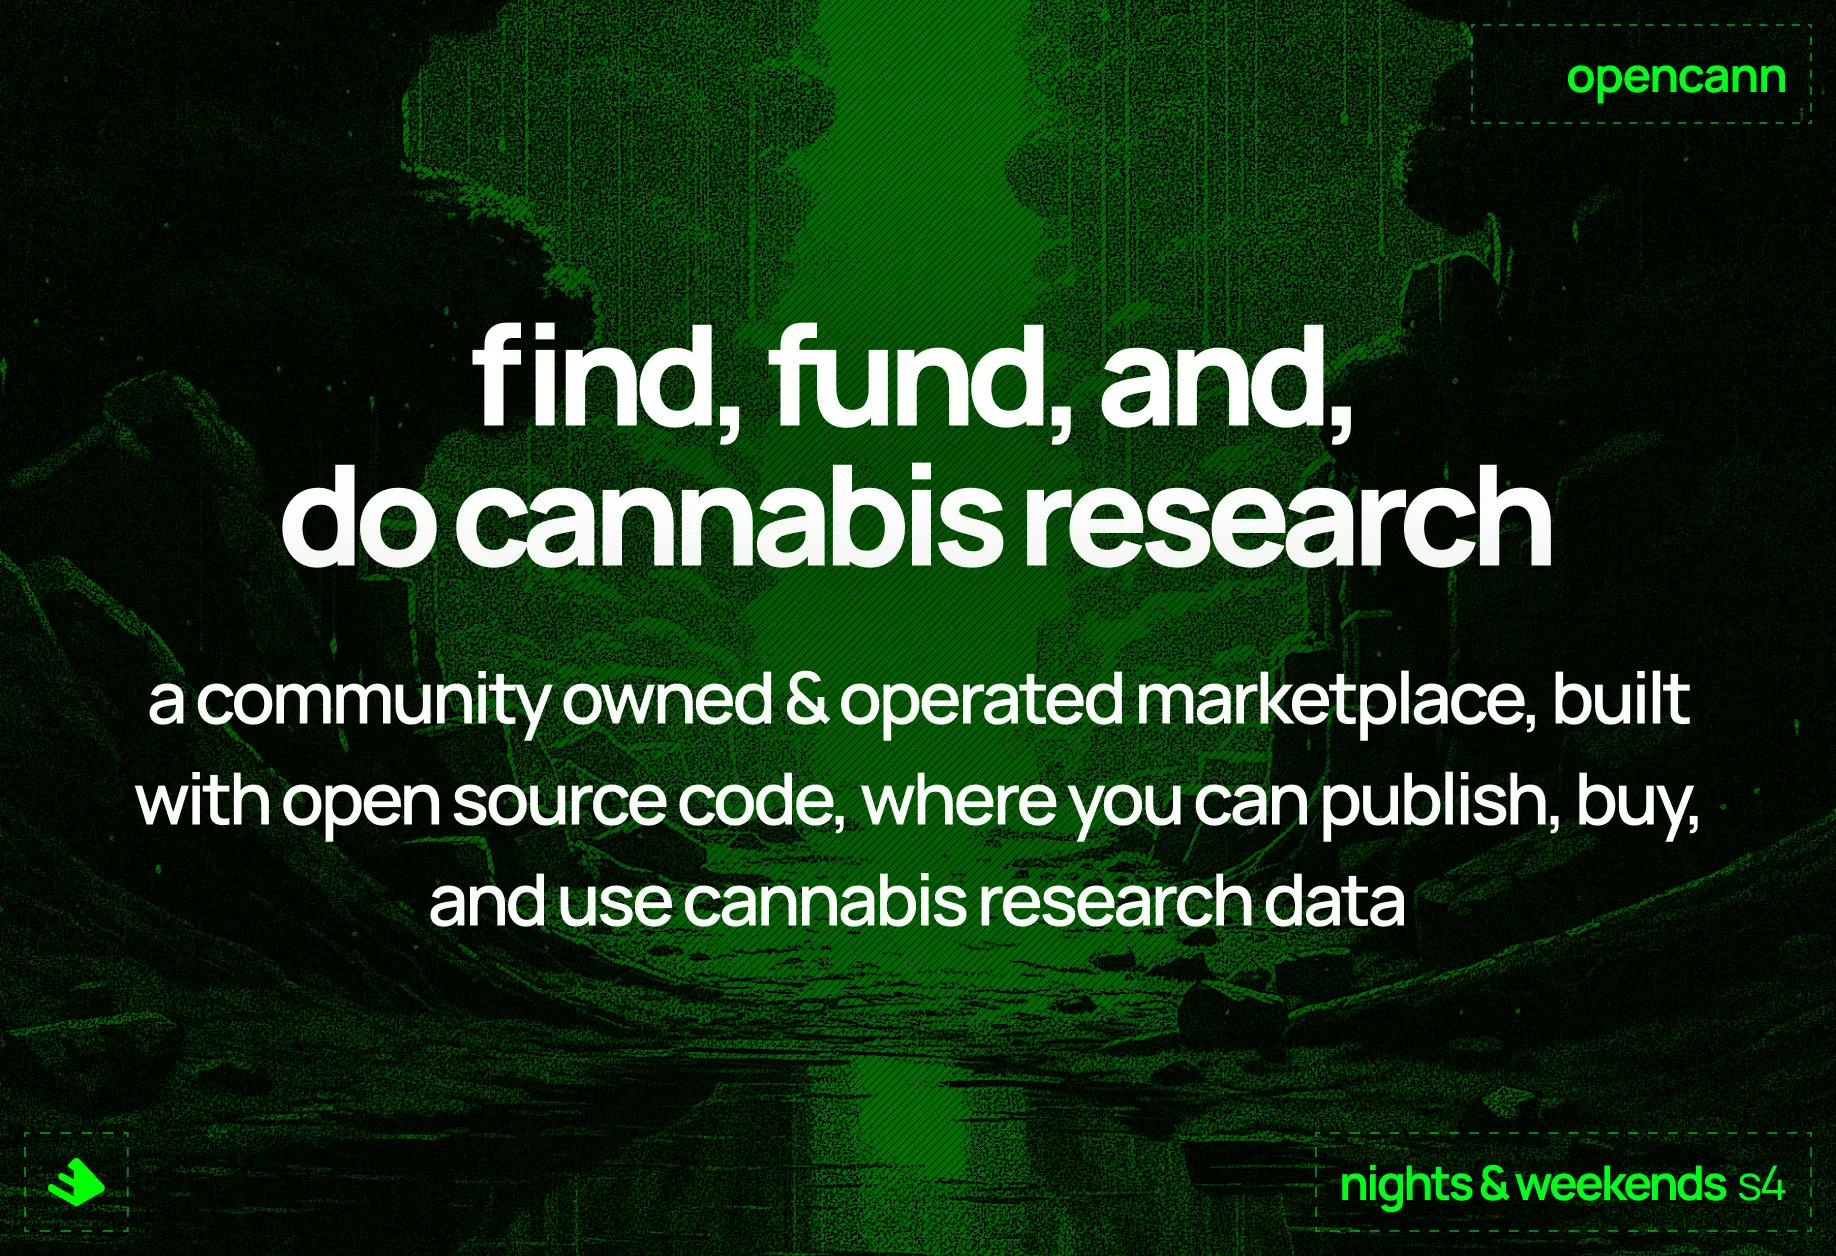 Find, fund, and do cannabis research